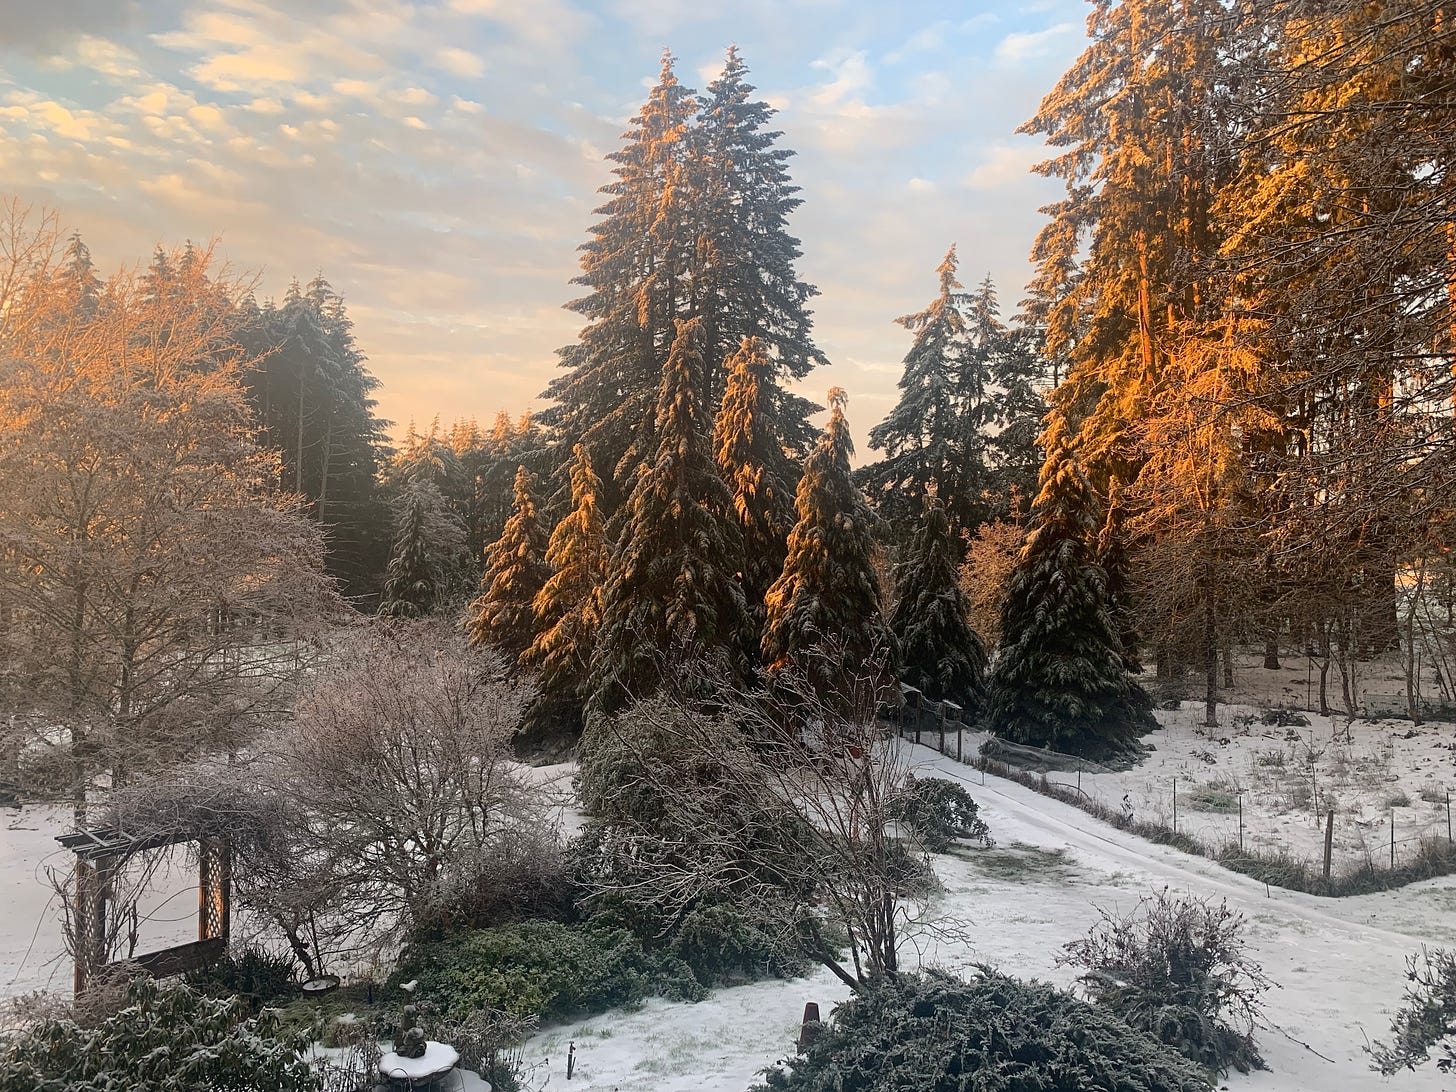 A winter scene with Douglas firs, bare trees, a bird bath, and a terrace catching the morning light.